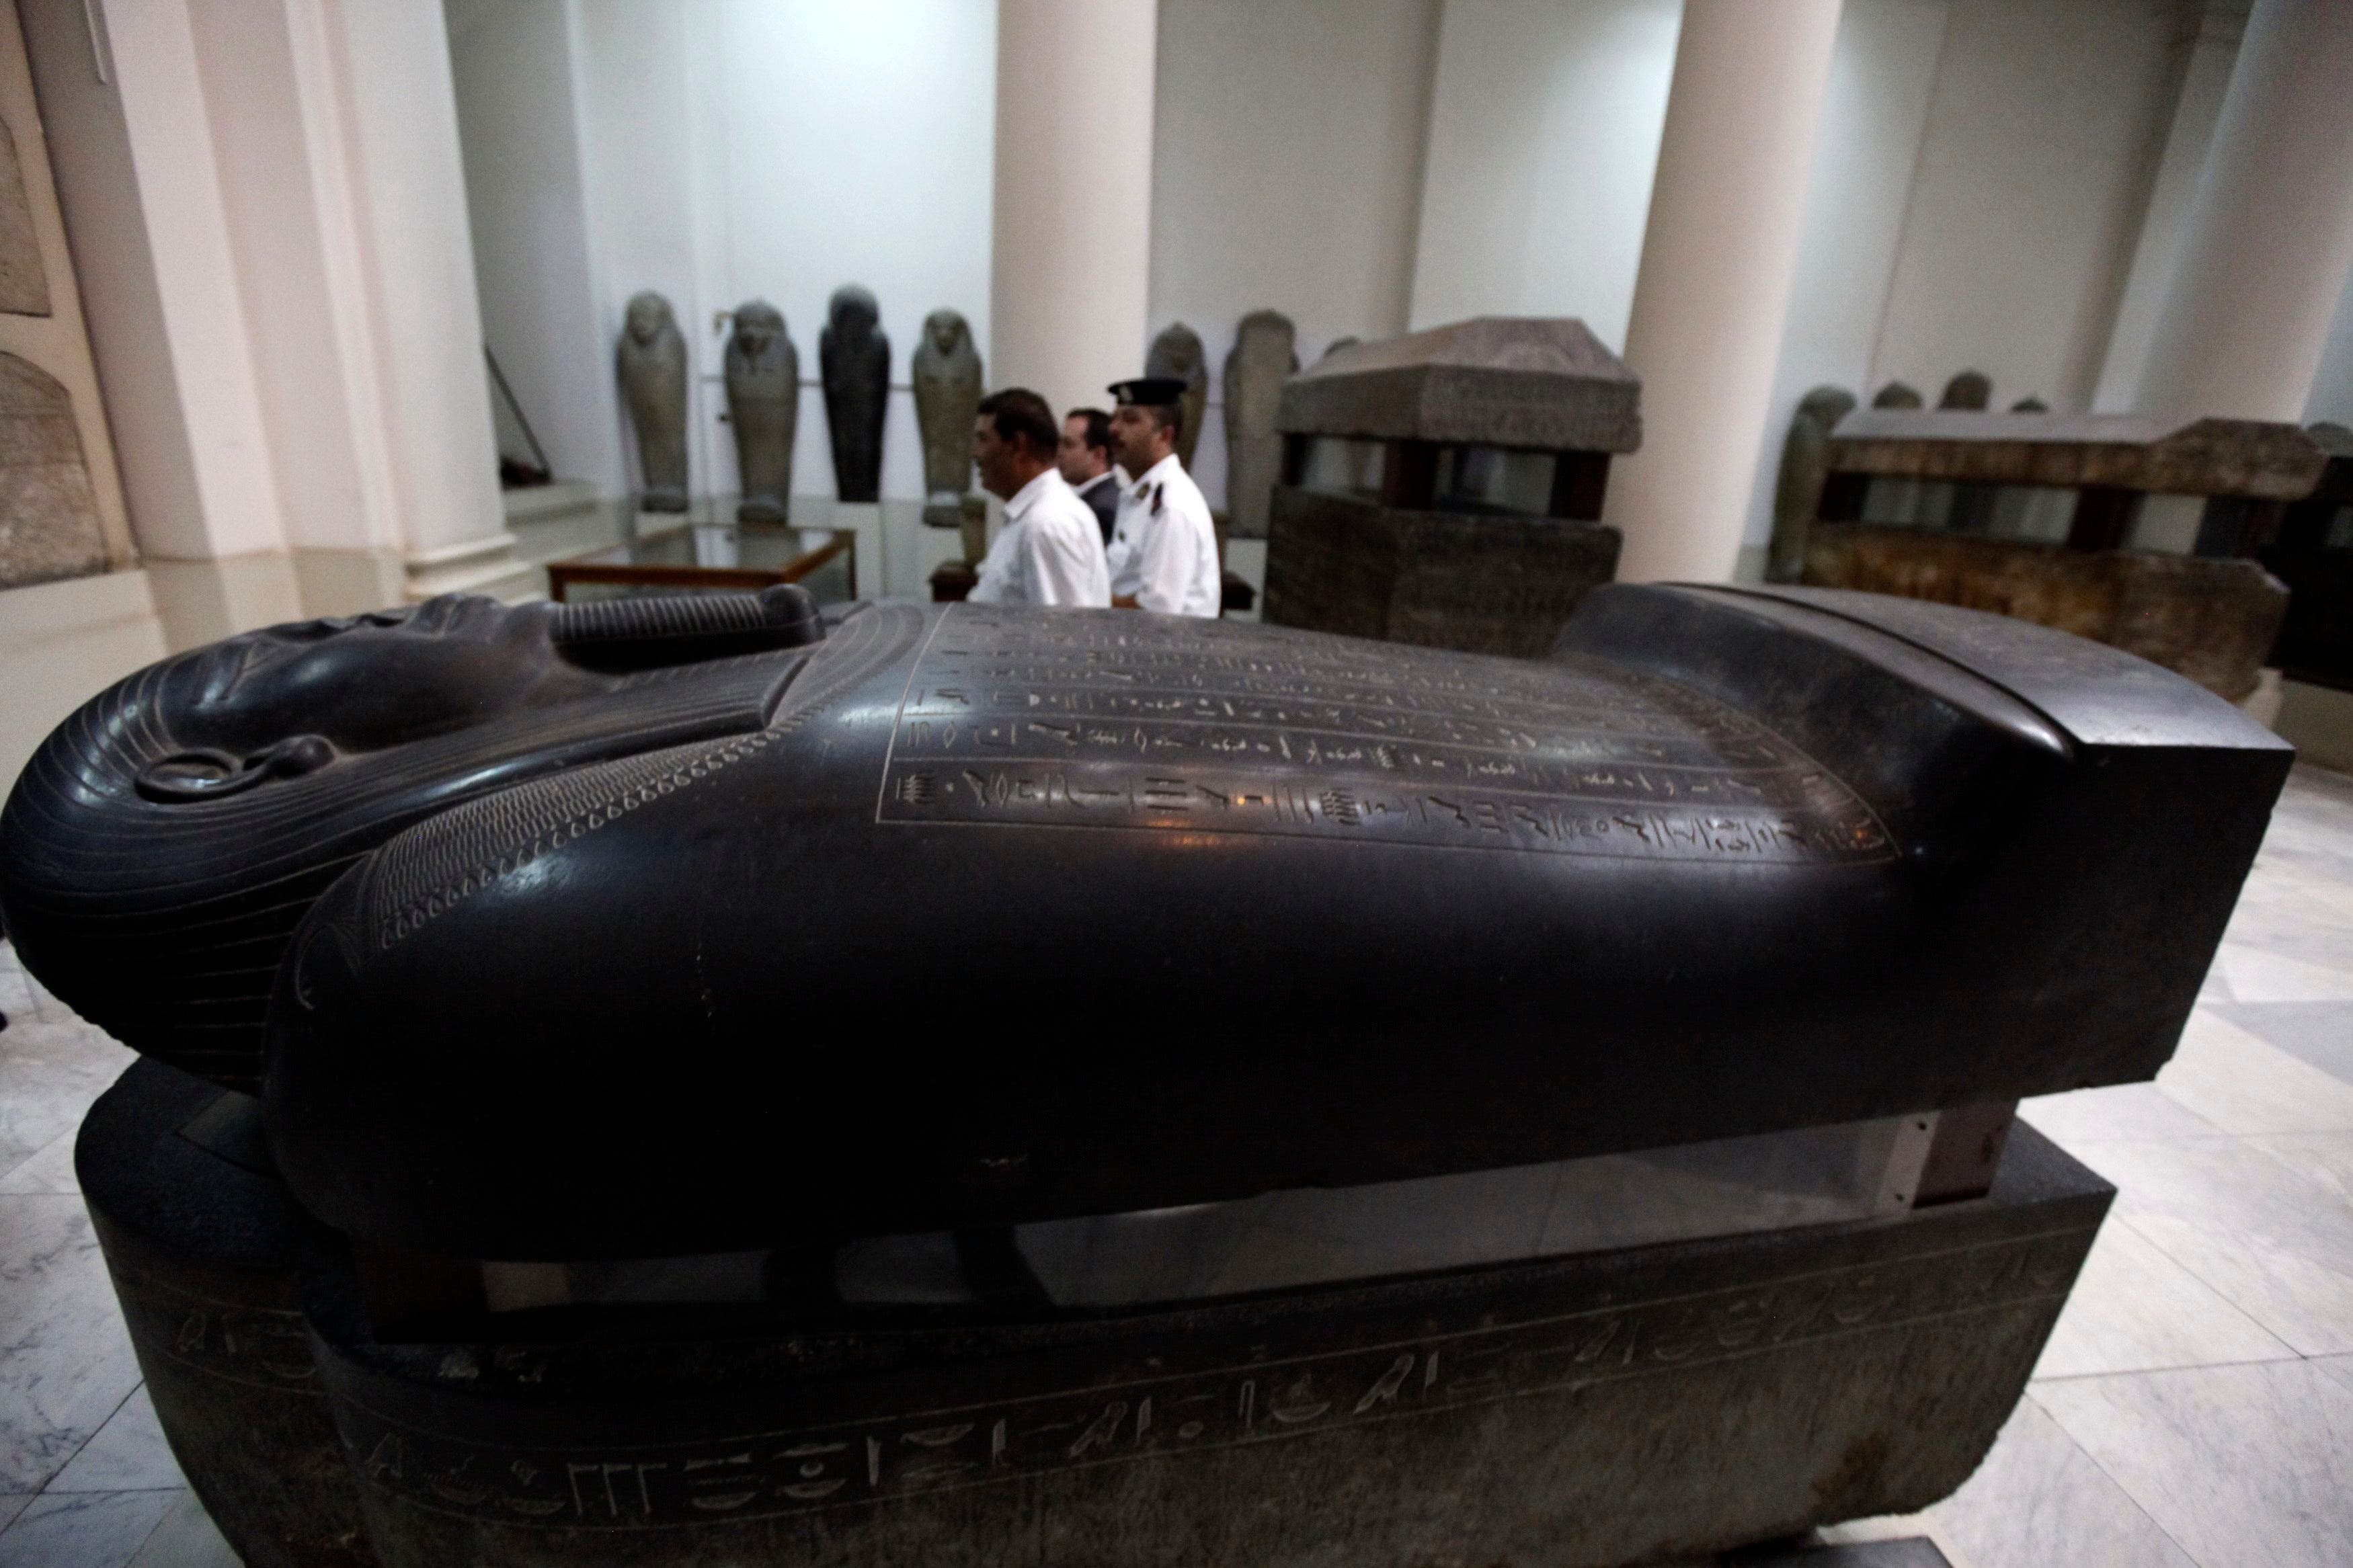 Stolen Artifacts returned to Egypt